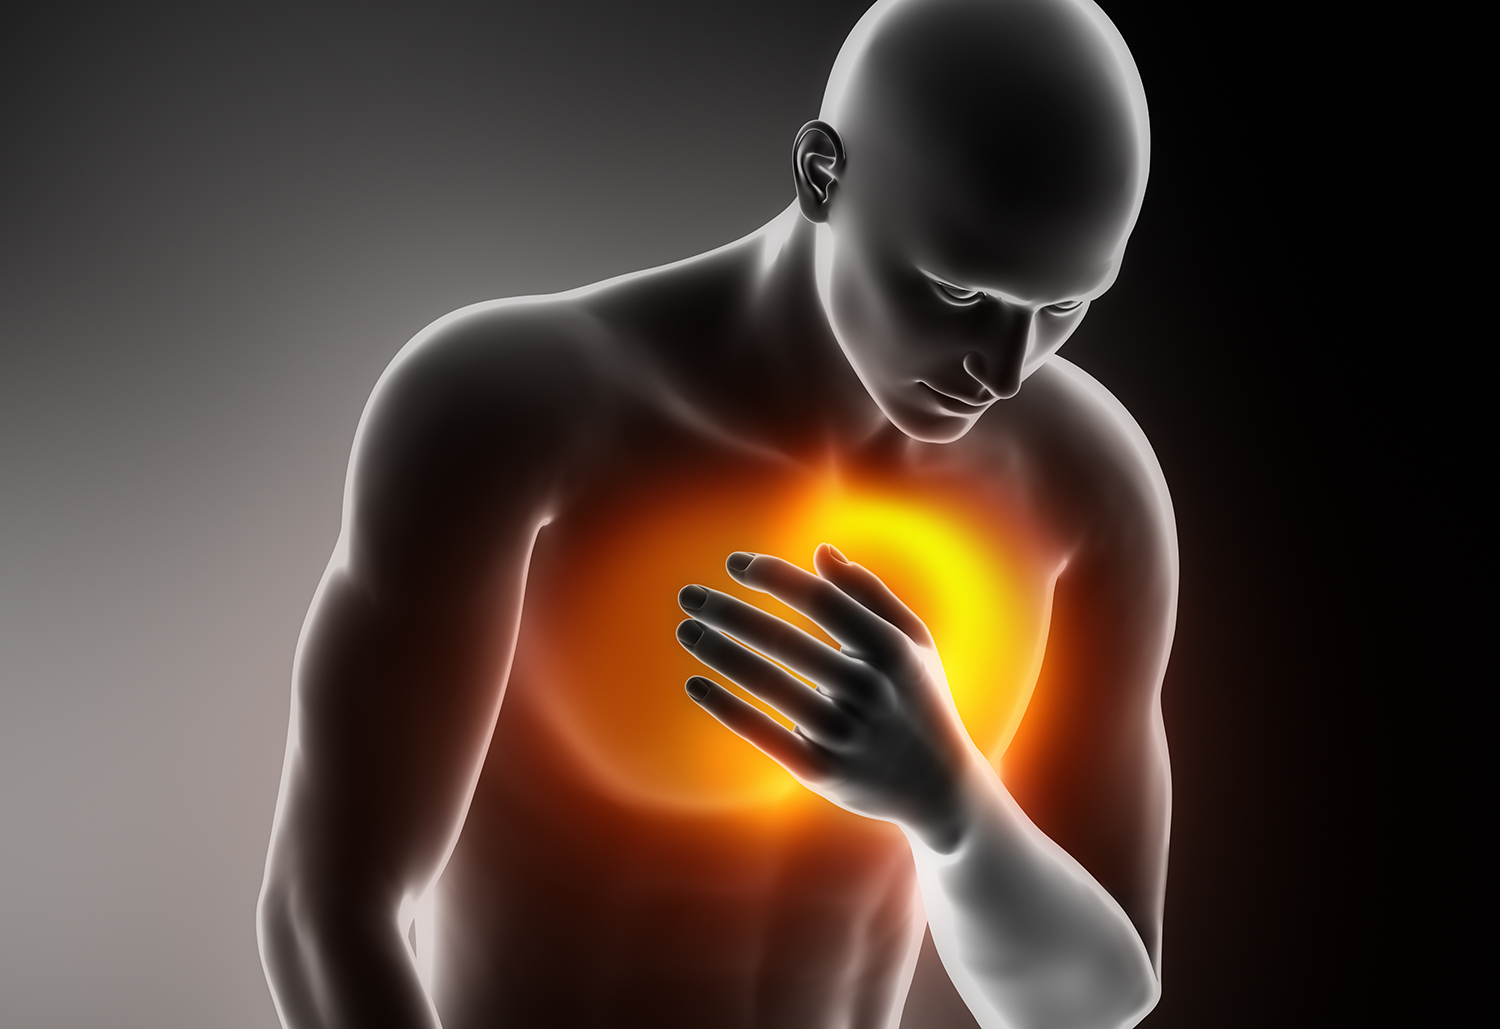 What is a frequent cause of noncardiac muscular pain in the chest?